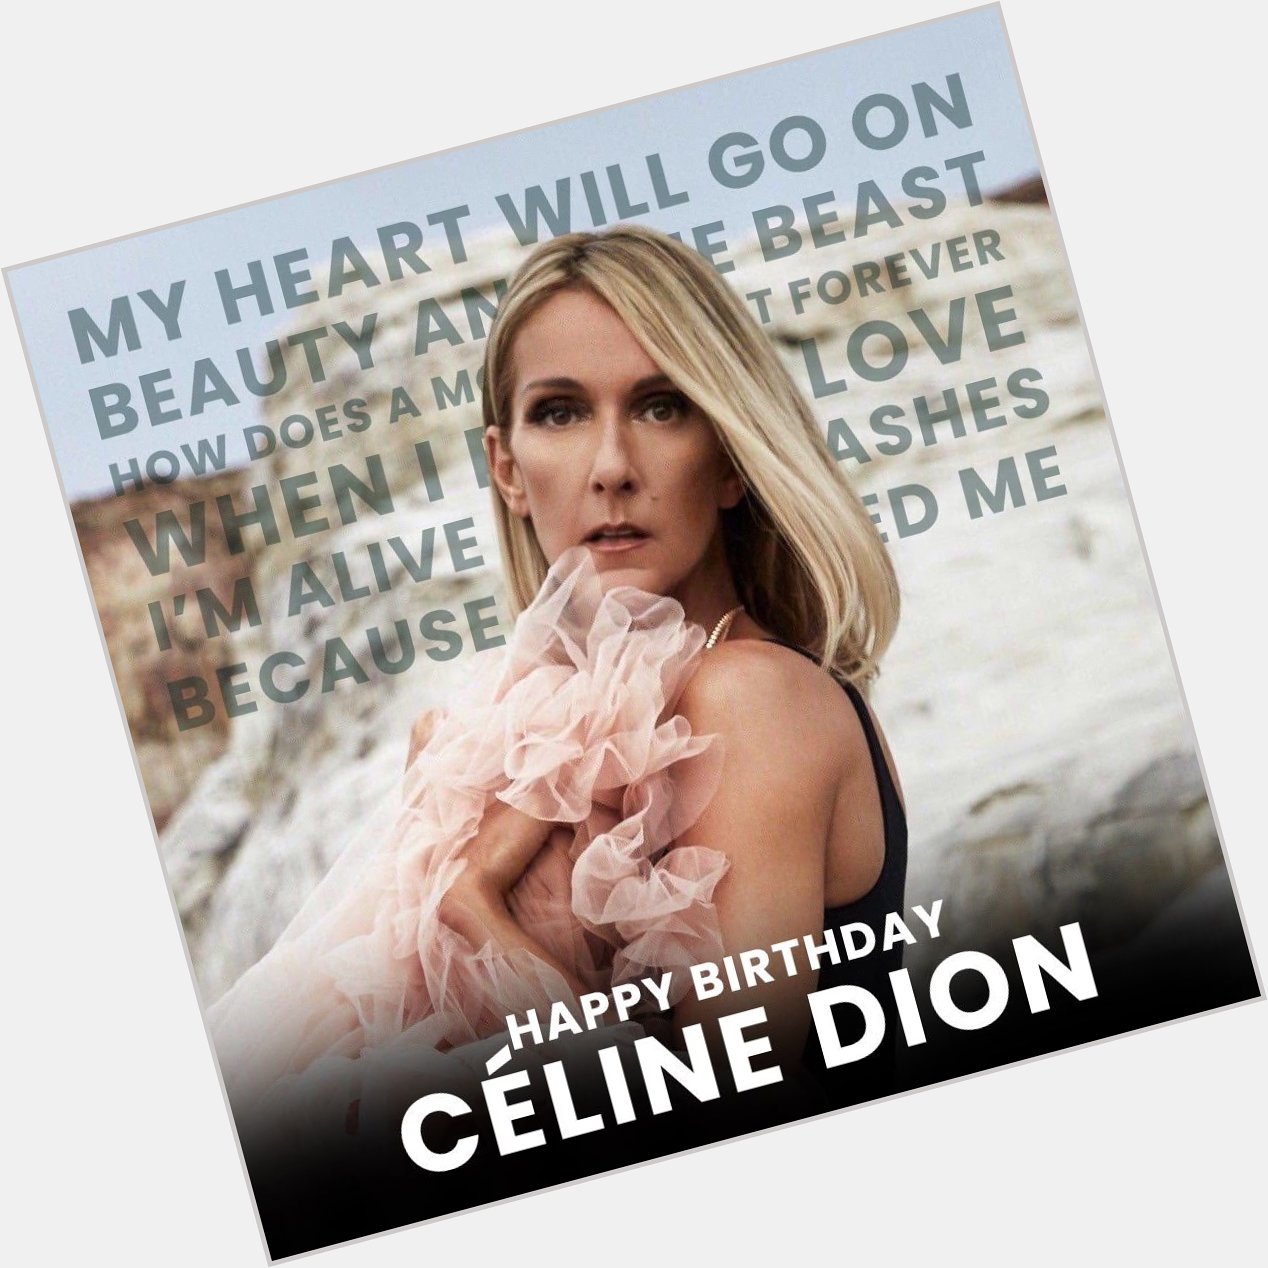 Happy Birthday Céline Dion! What\s your favorite movie theme song by Celine?    